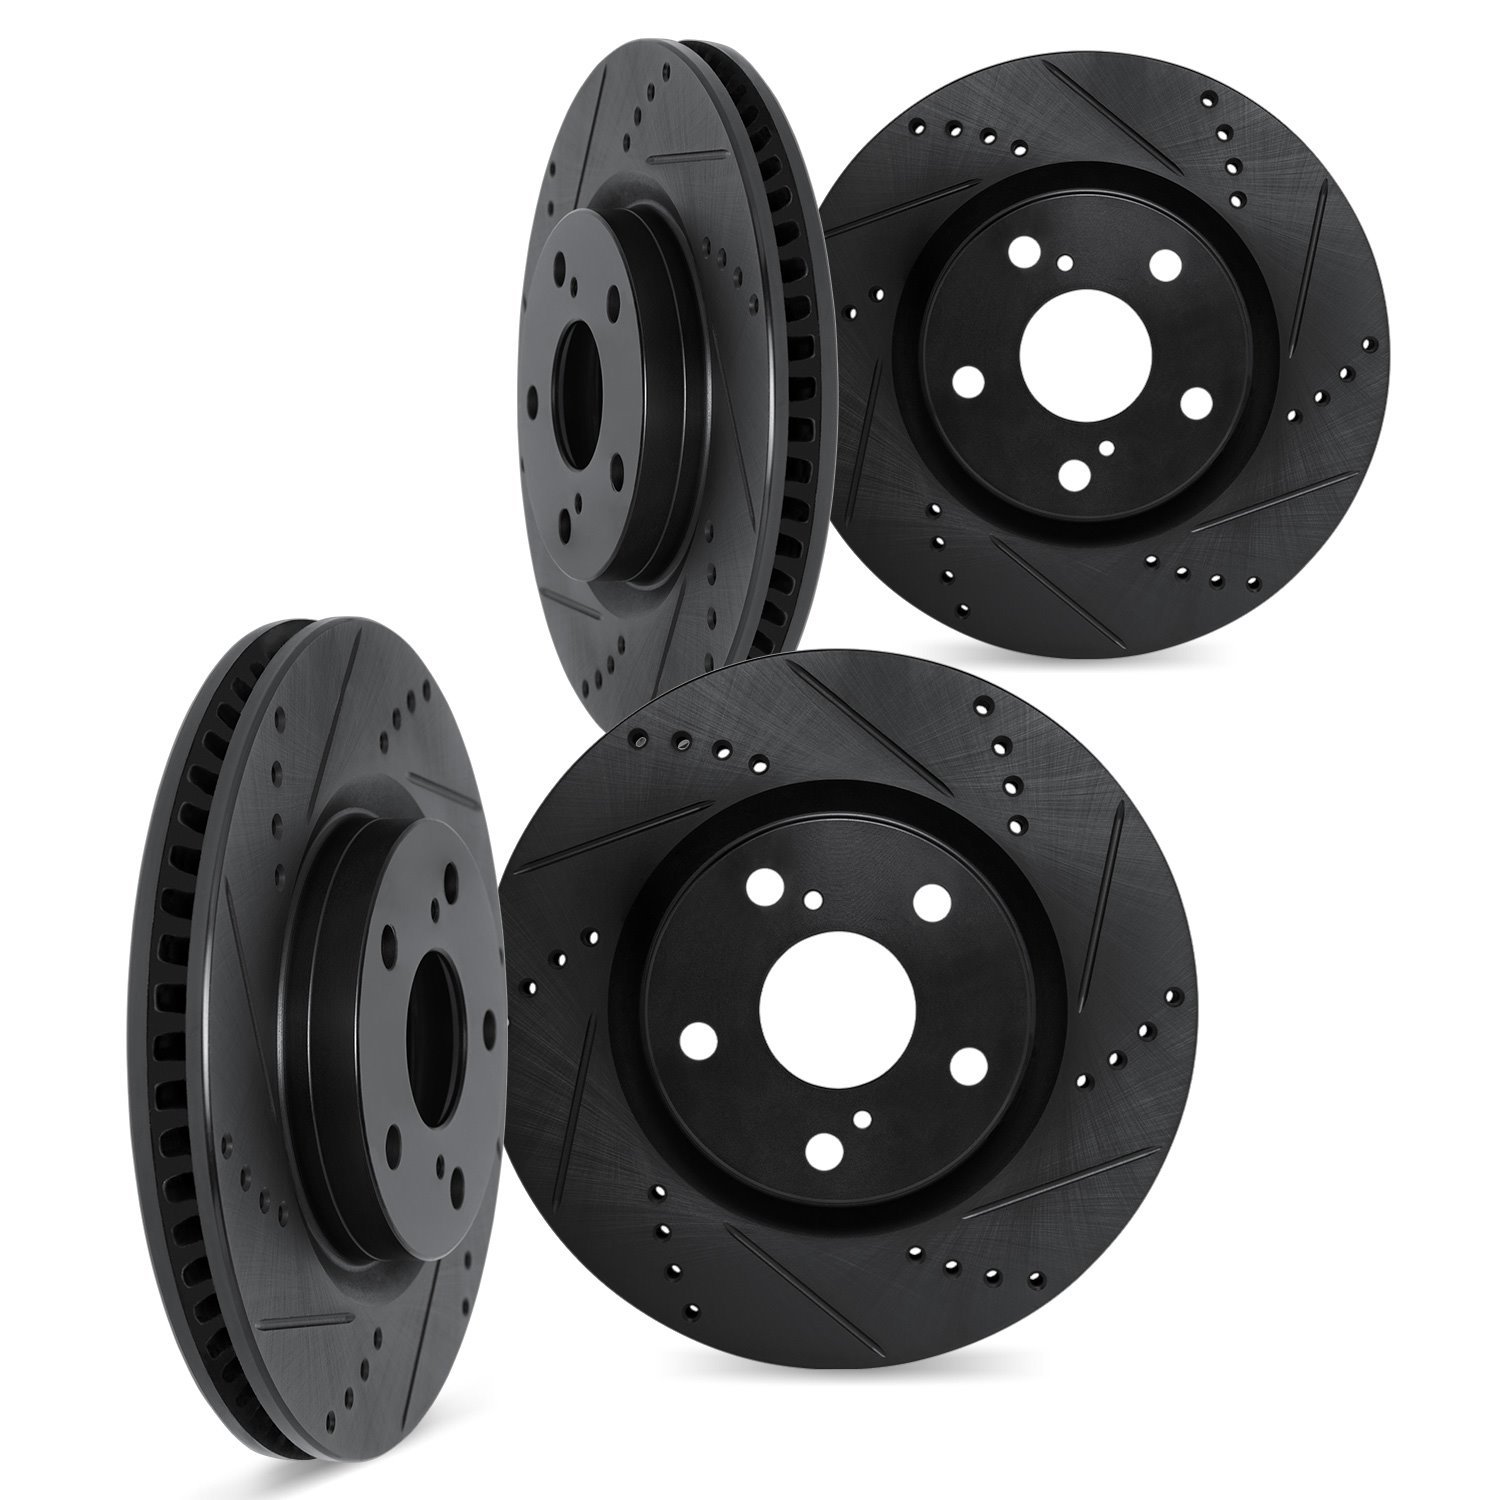 8004-13040 Drilled/Slotted Brake Rotors [Black], 2008-2020 Subaru, Position: Front and Rear